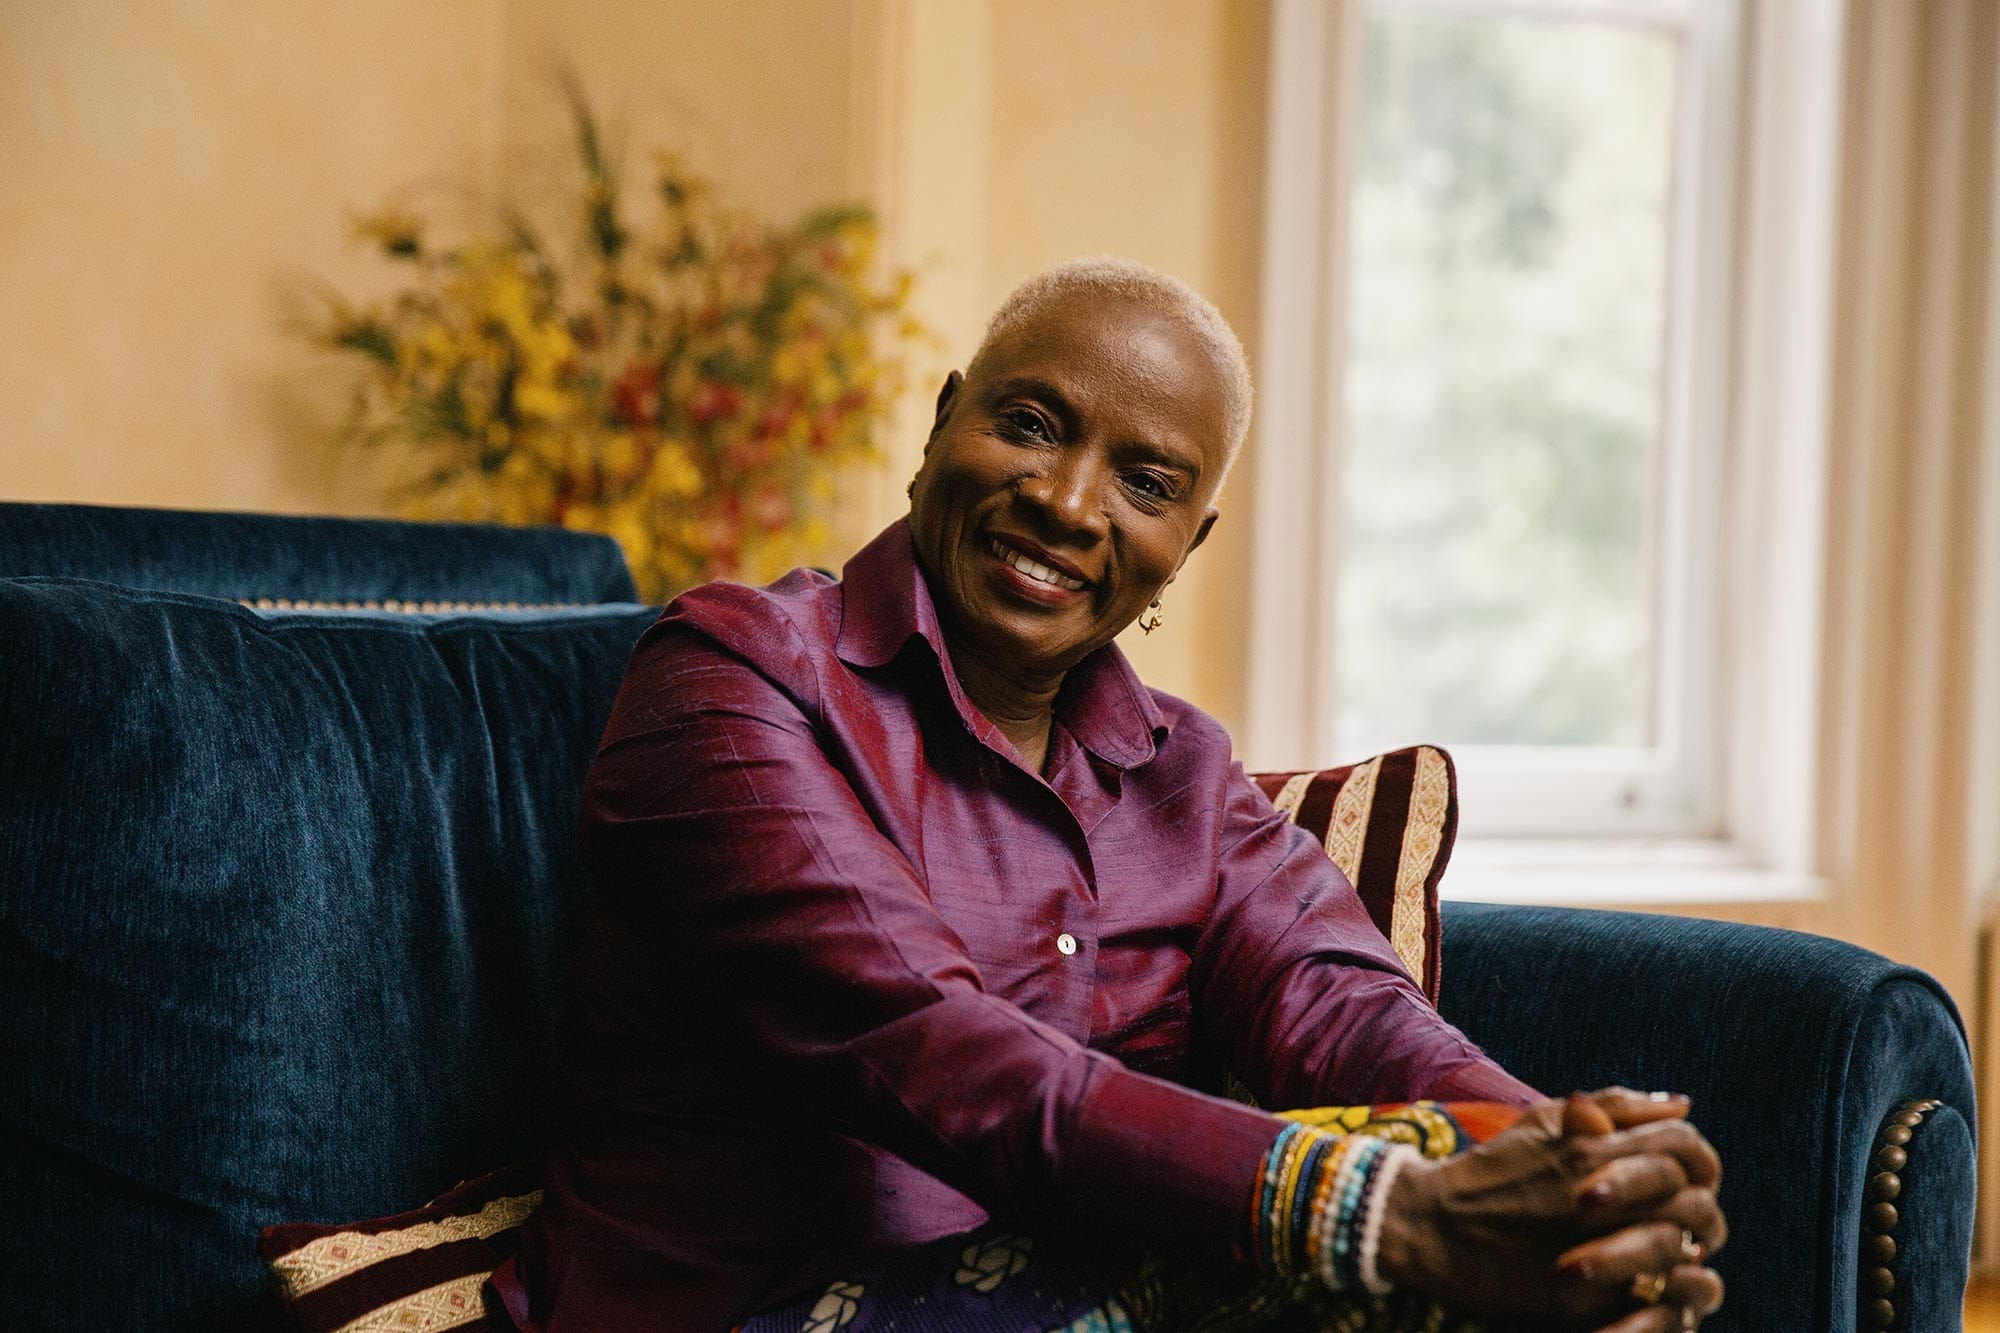 Angélique Kidjo, hands on knees, leaning forward and smiling while sitting on a couch.